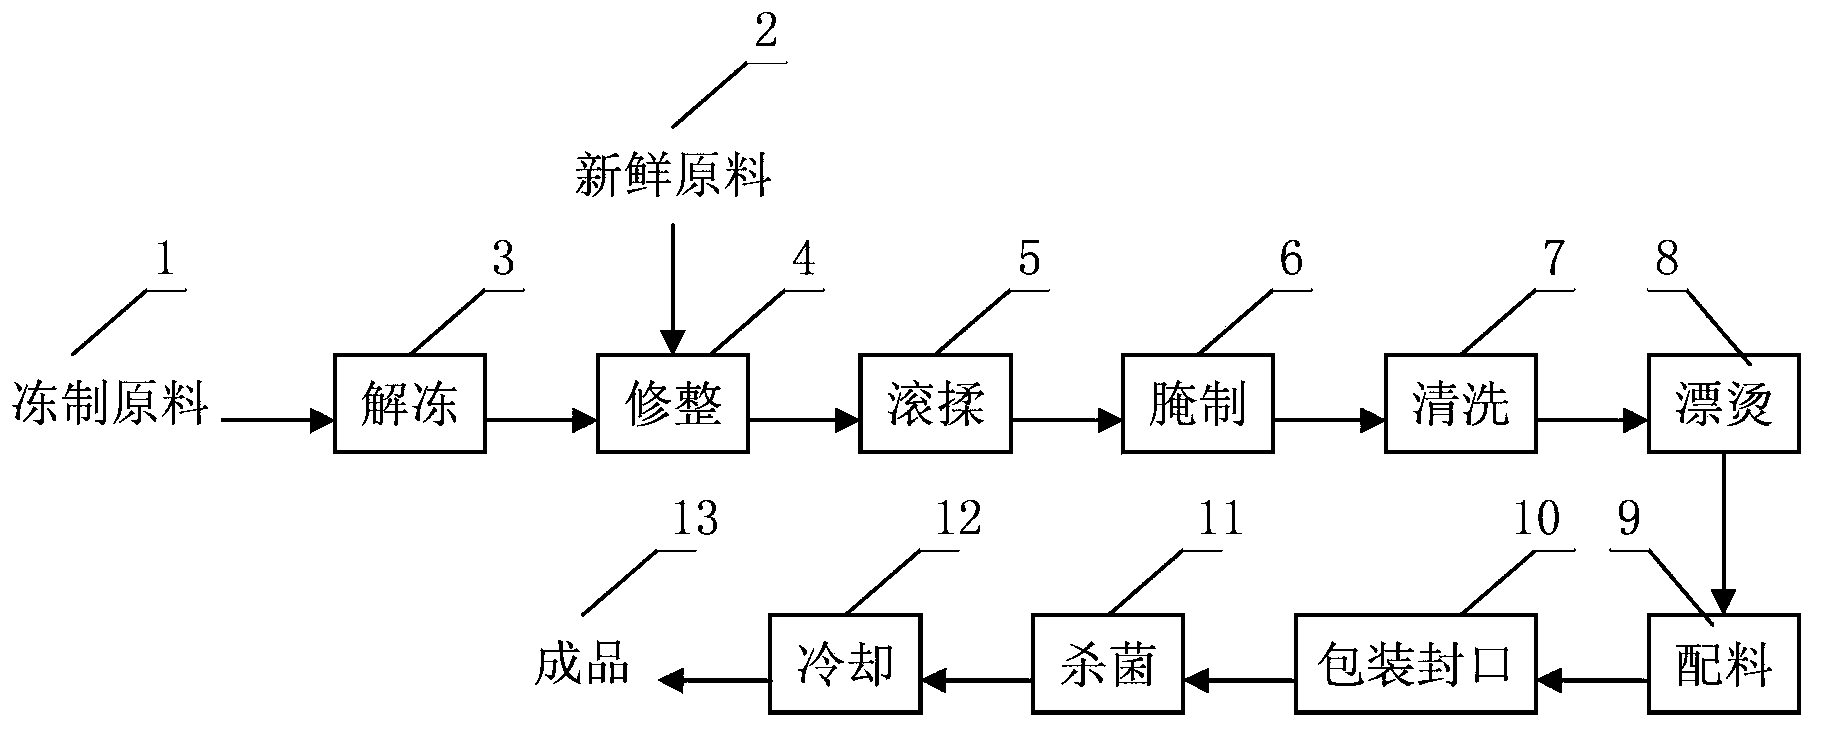 Production method for pickled radish and duck soup leisure food